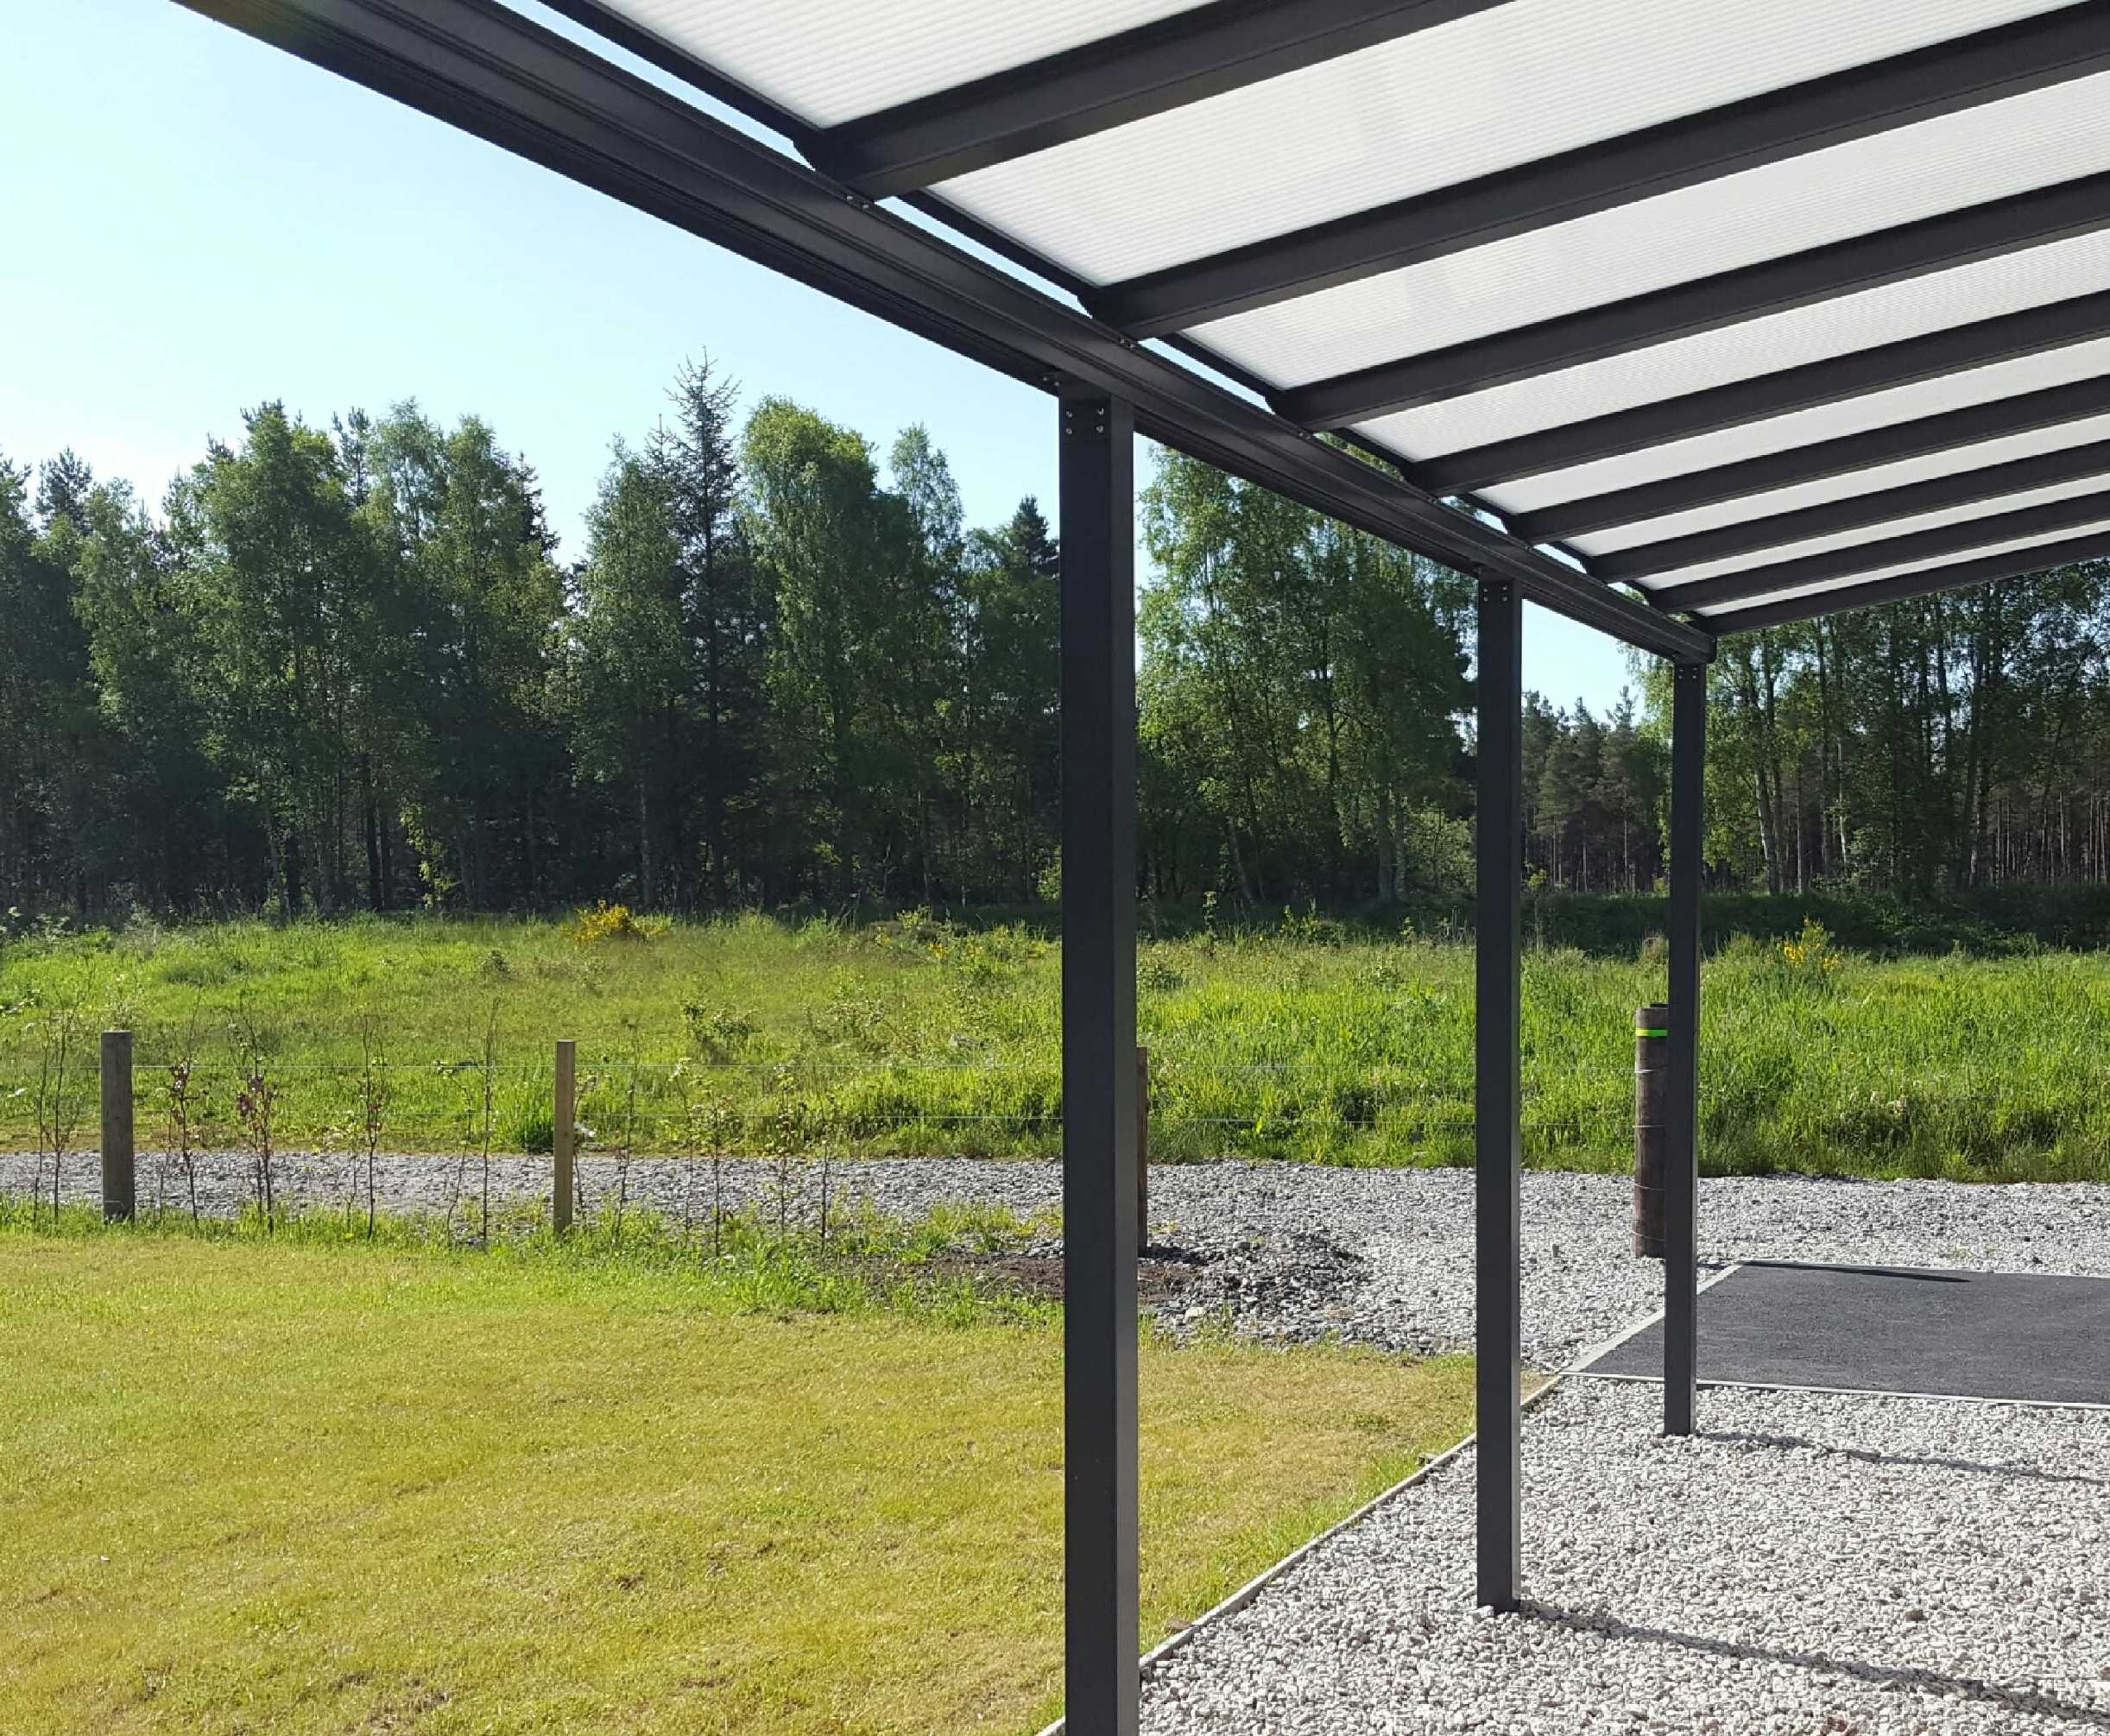 Omega Smart Lean-To Canopy, Anthracite Grey, 6mm Glass Clear Plate Polycarbonate Glazing - 3.5m (W) x 1.5m (P), (3) Supporting Posts